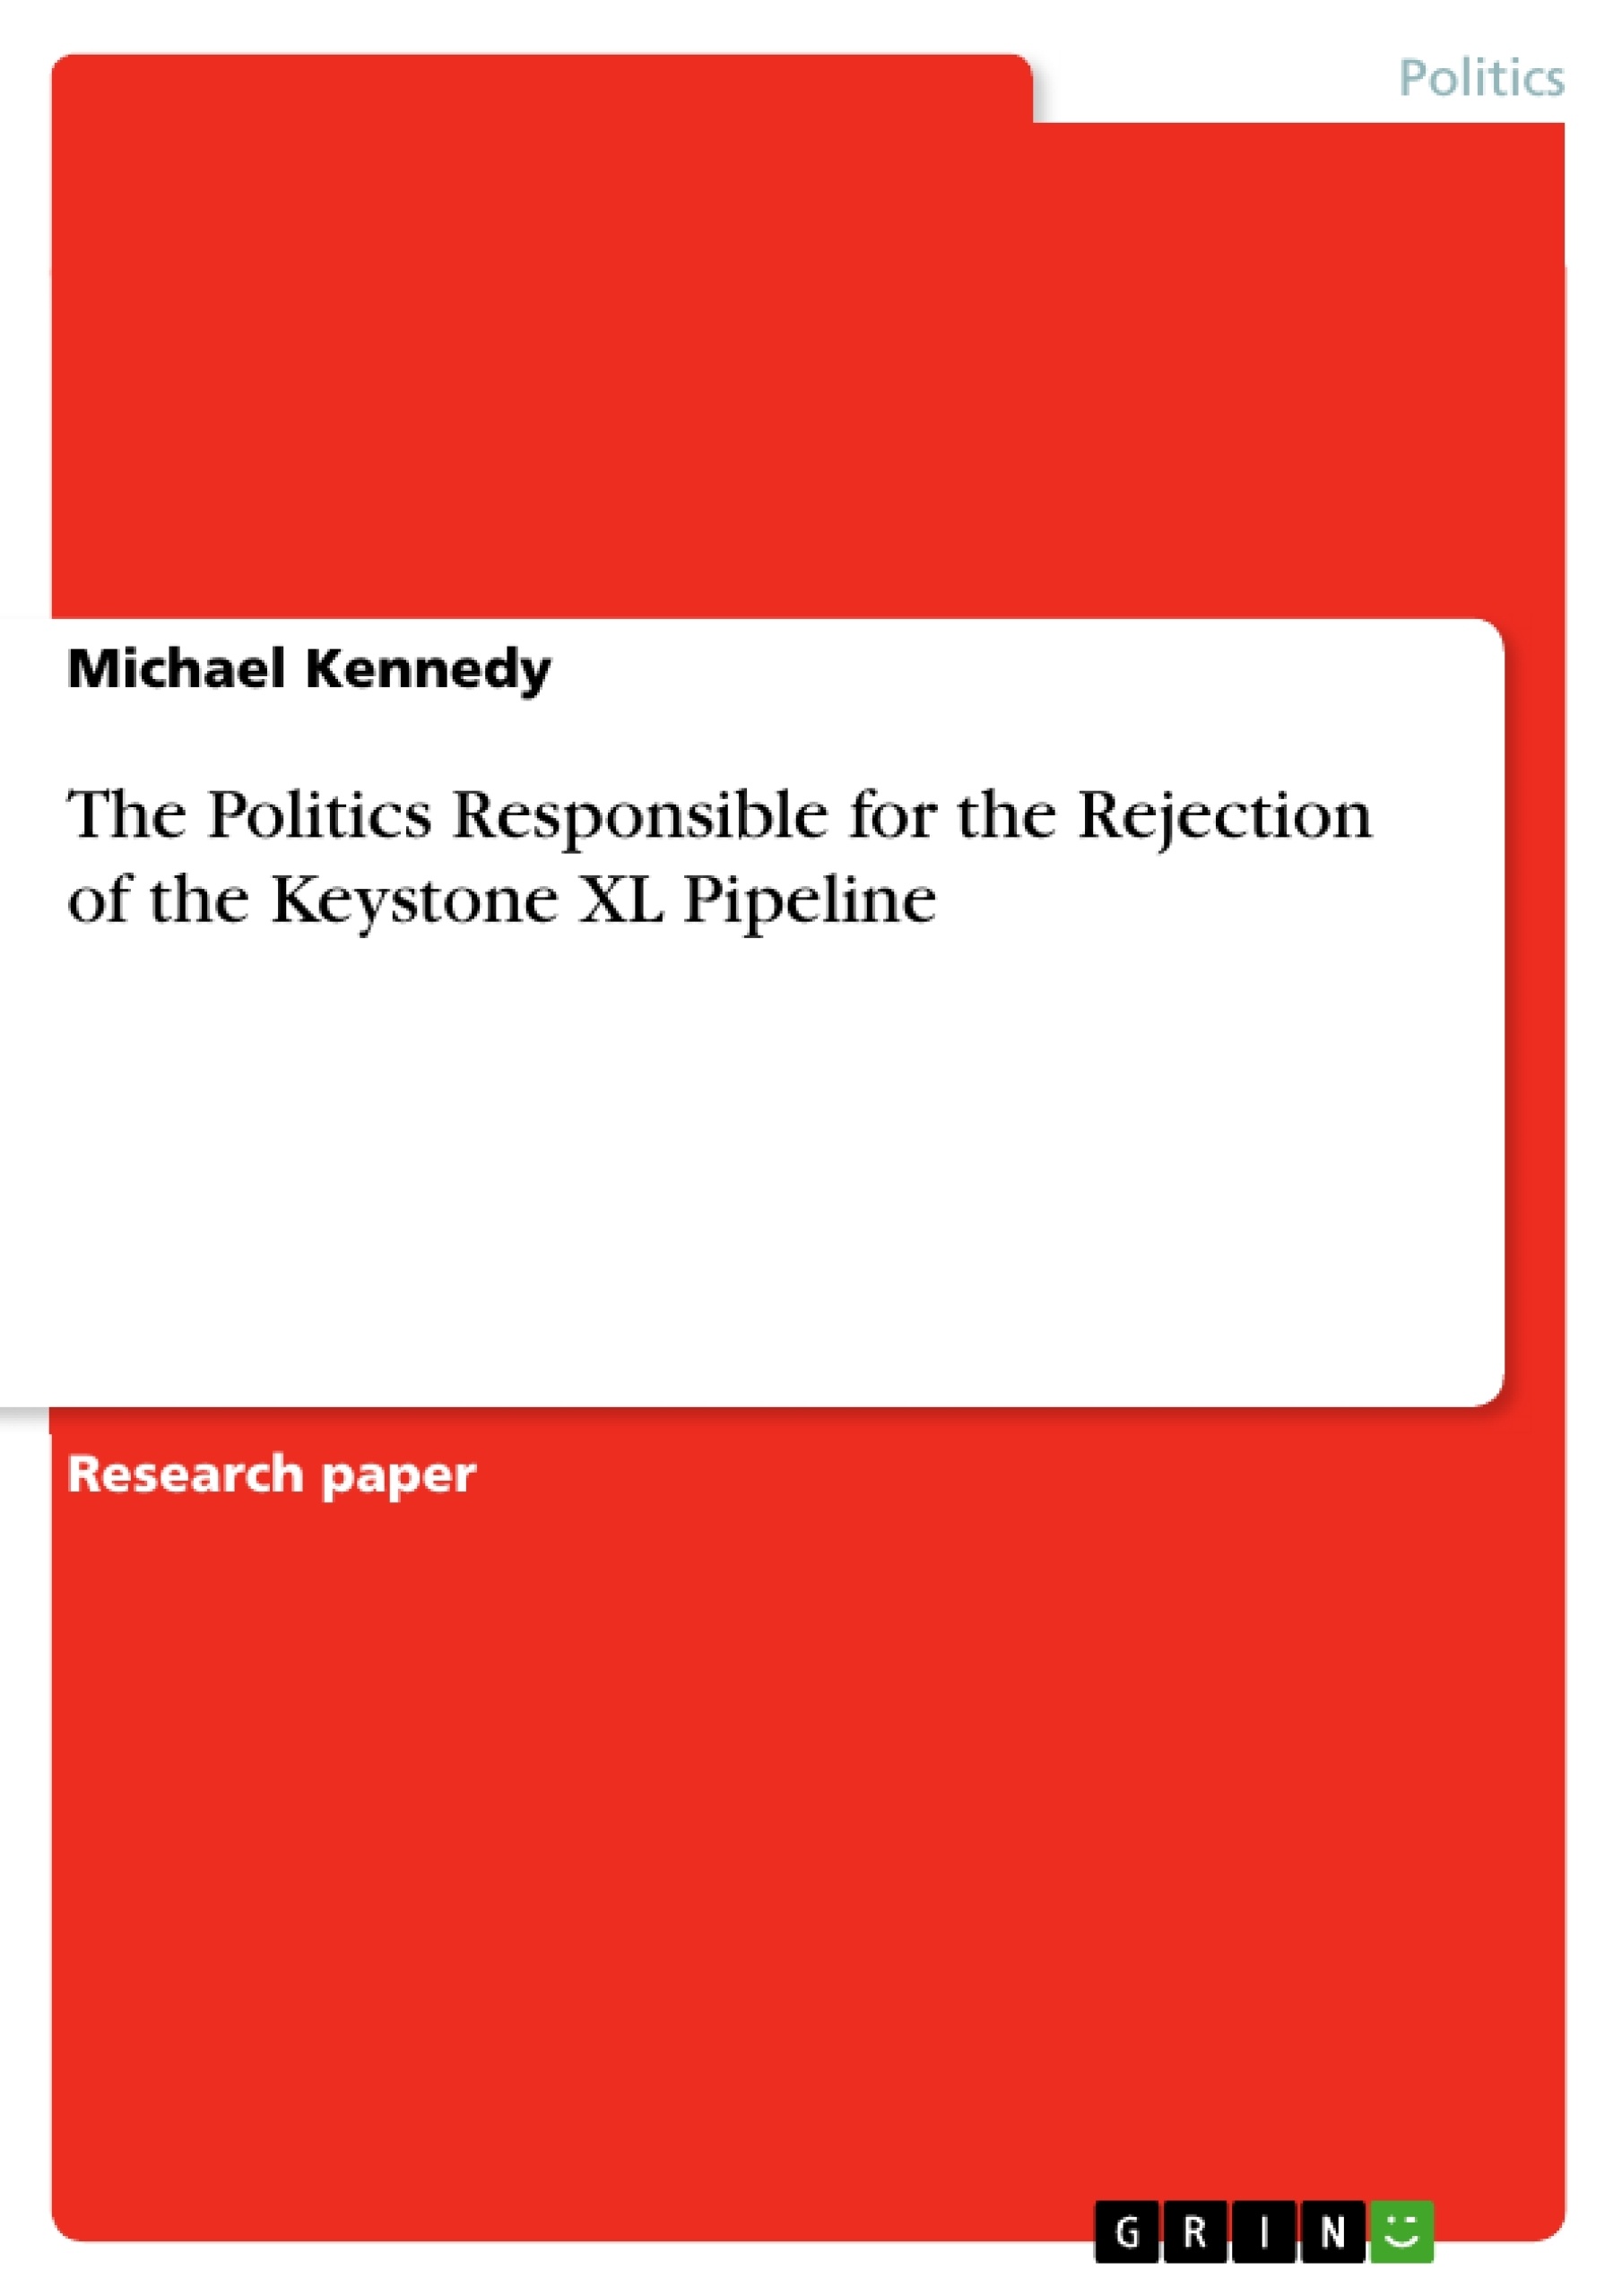 Titre: The Politics Responsible for the Rejection of the Keystone XL Pipeline